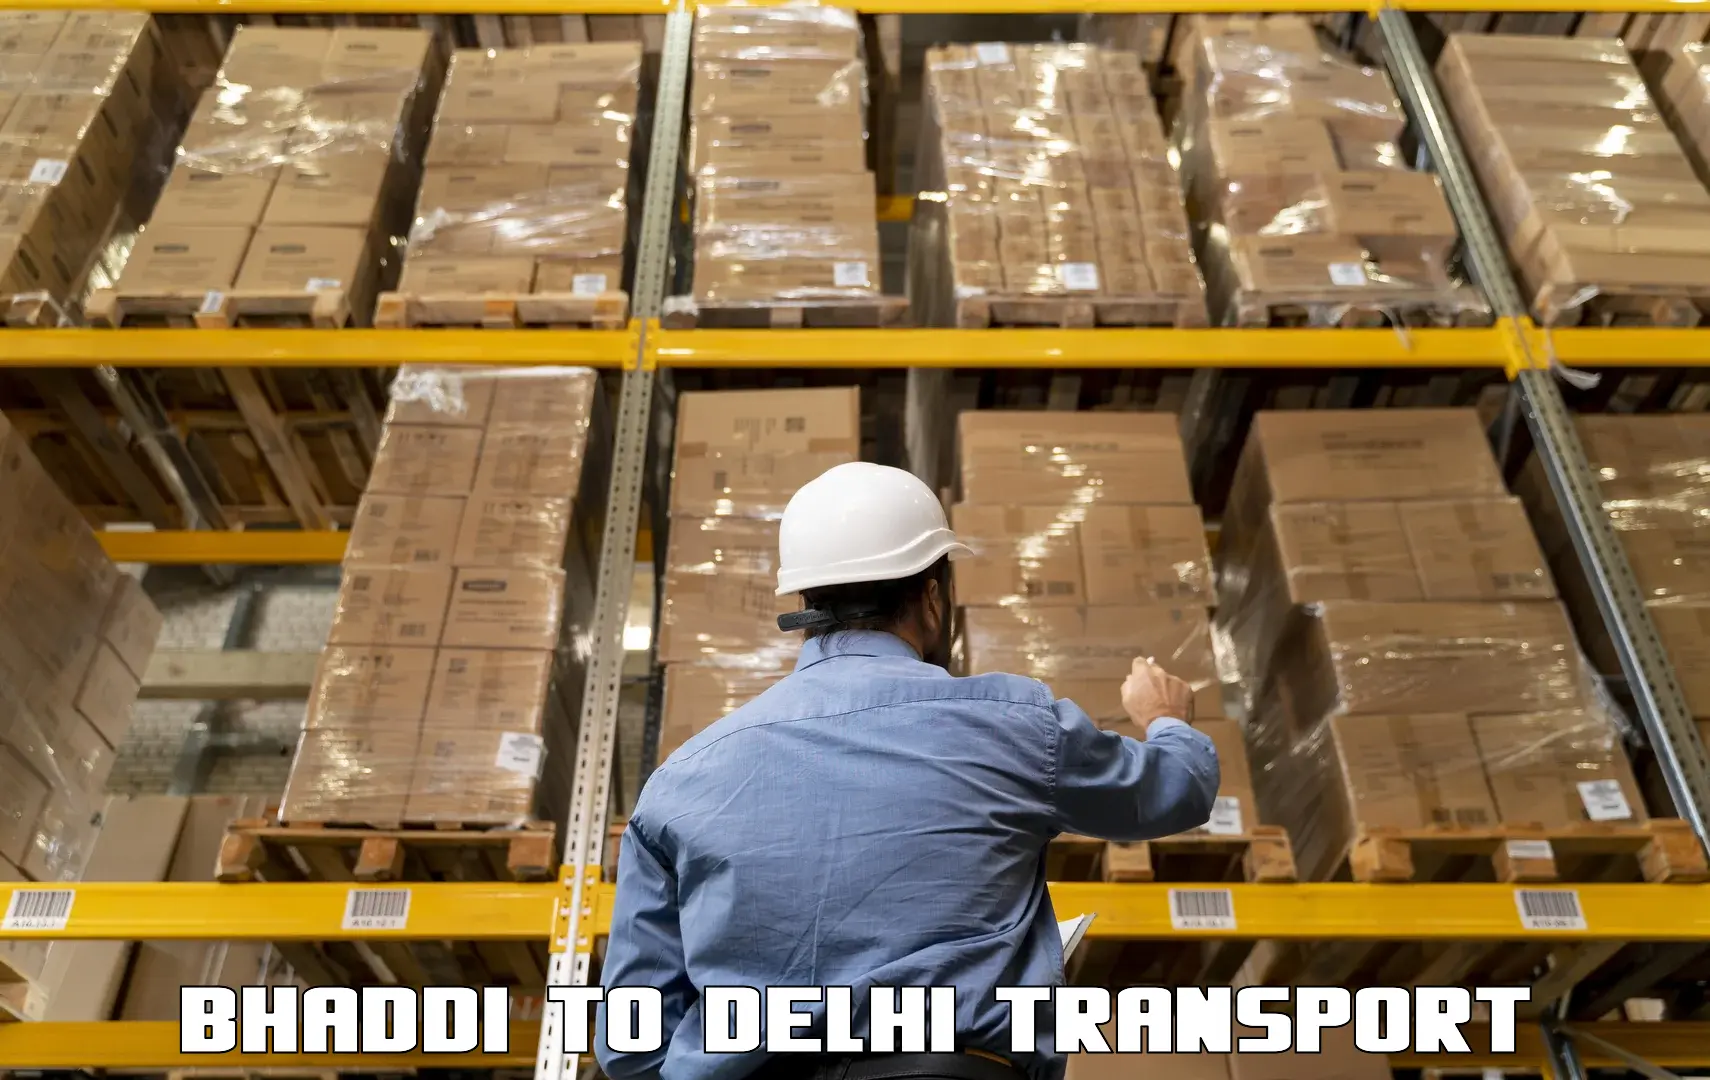 Container transportation services Bhaddi to NCR